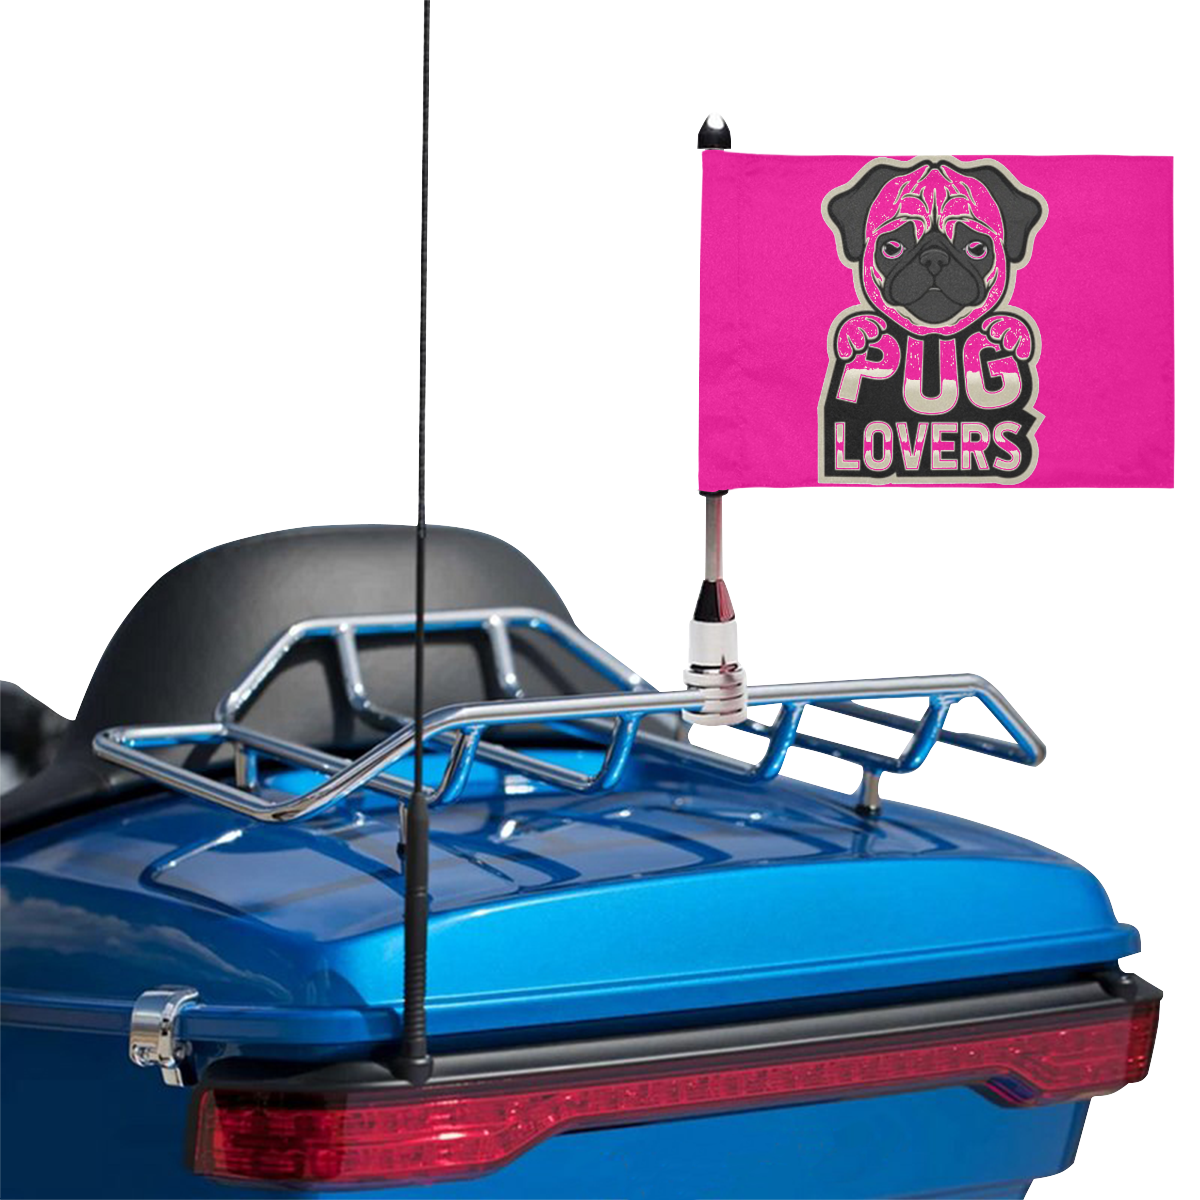 PUG LOVERS Motorcycle Flag (Twin Sides)